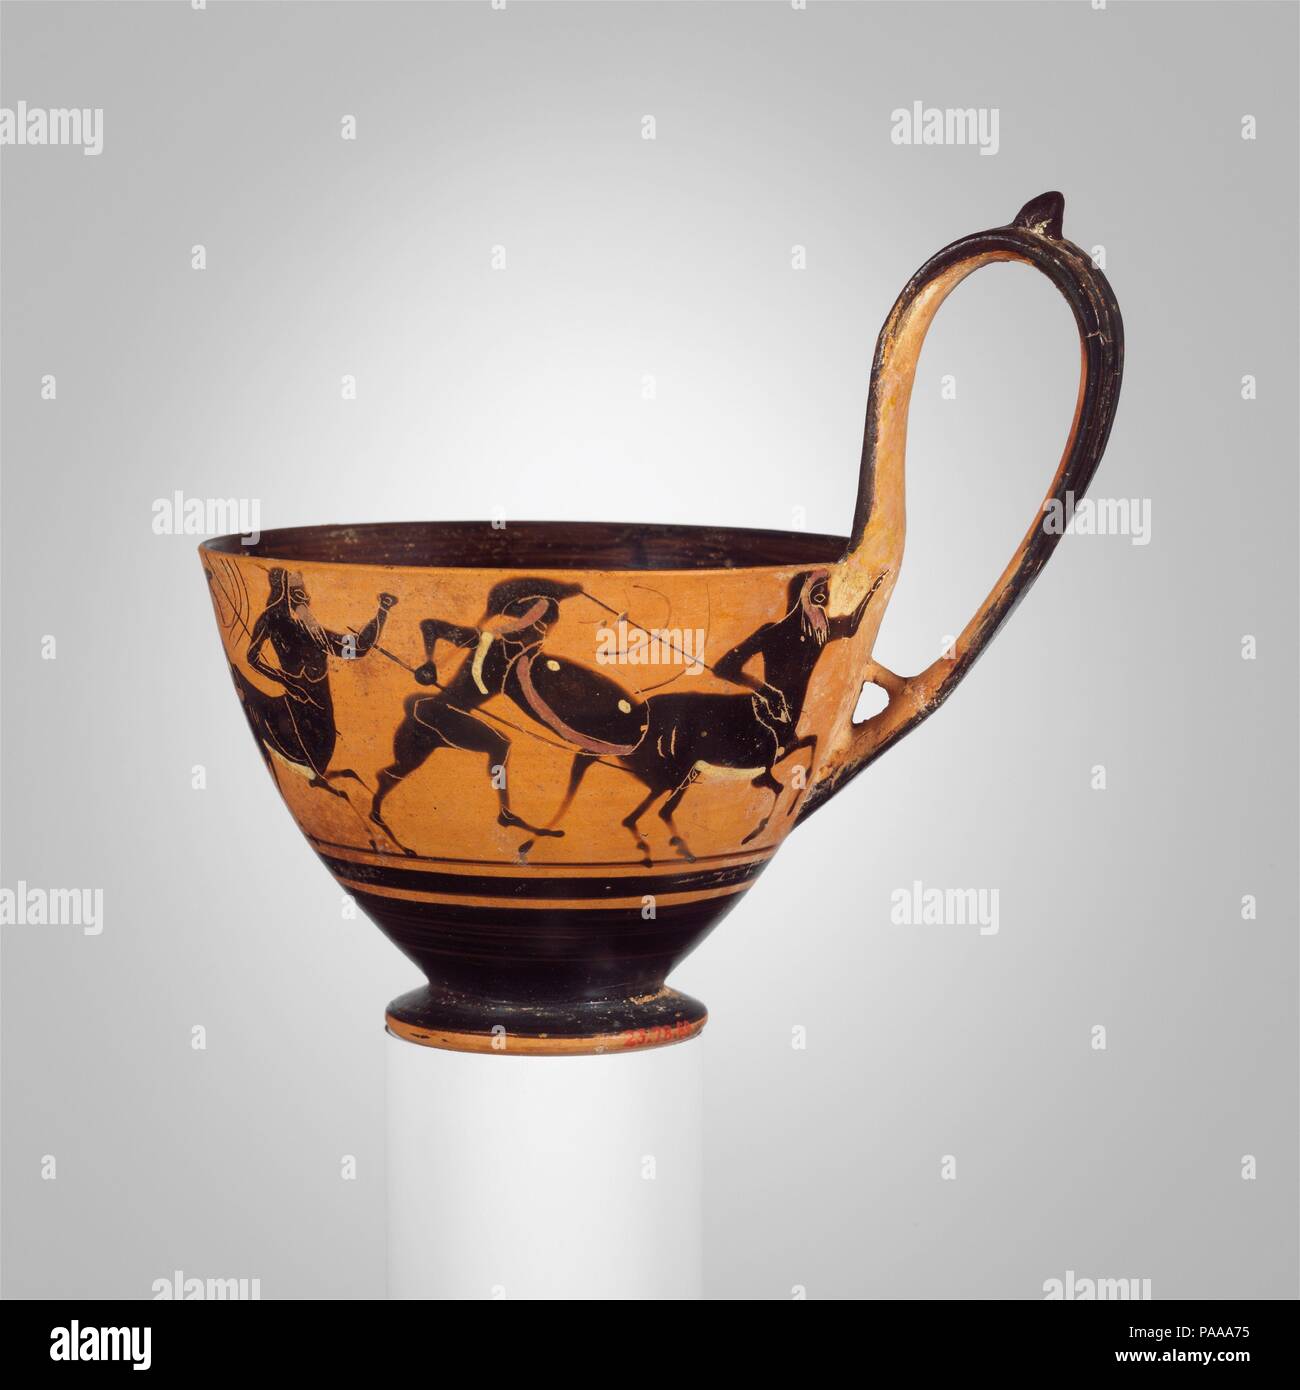 Terracotta kyathos (cup-shaped ladle). Culture: Greek, Attic. Dimensions: 4 15/16in. (12.5cm). Date: ca. 530-500 B.C..  Battle of Lapiths and centaurs  Although kyathoi were made in Athens for export to Etruria, the decoration seems to be typically Greek. Museum: Metropolitan Museum of Art, New York, USA. Stock Photo